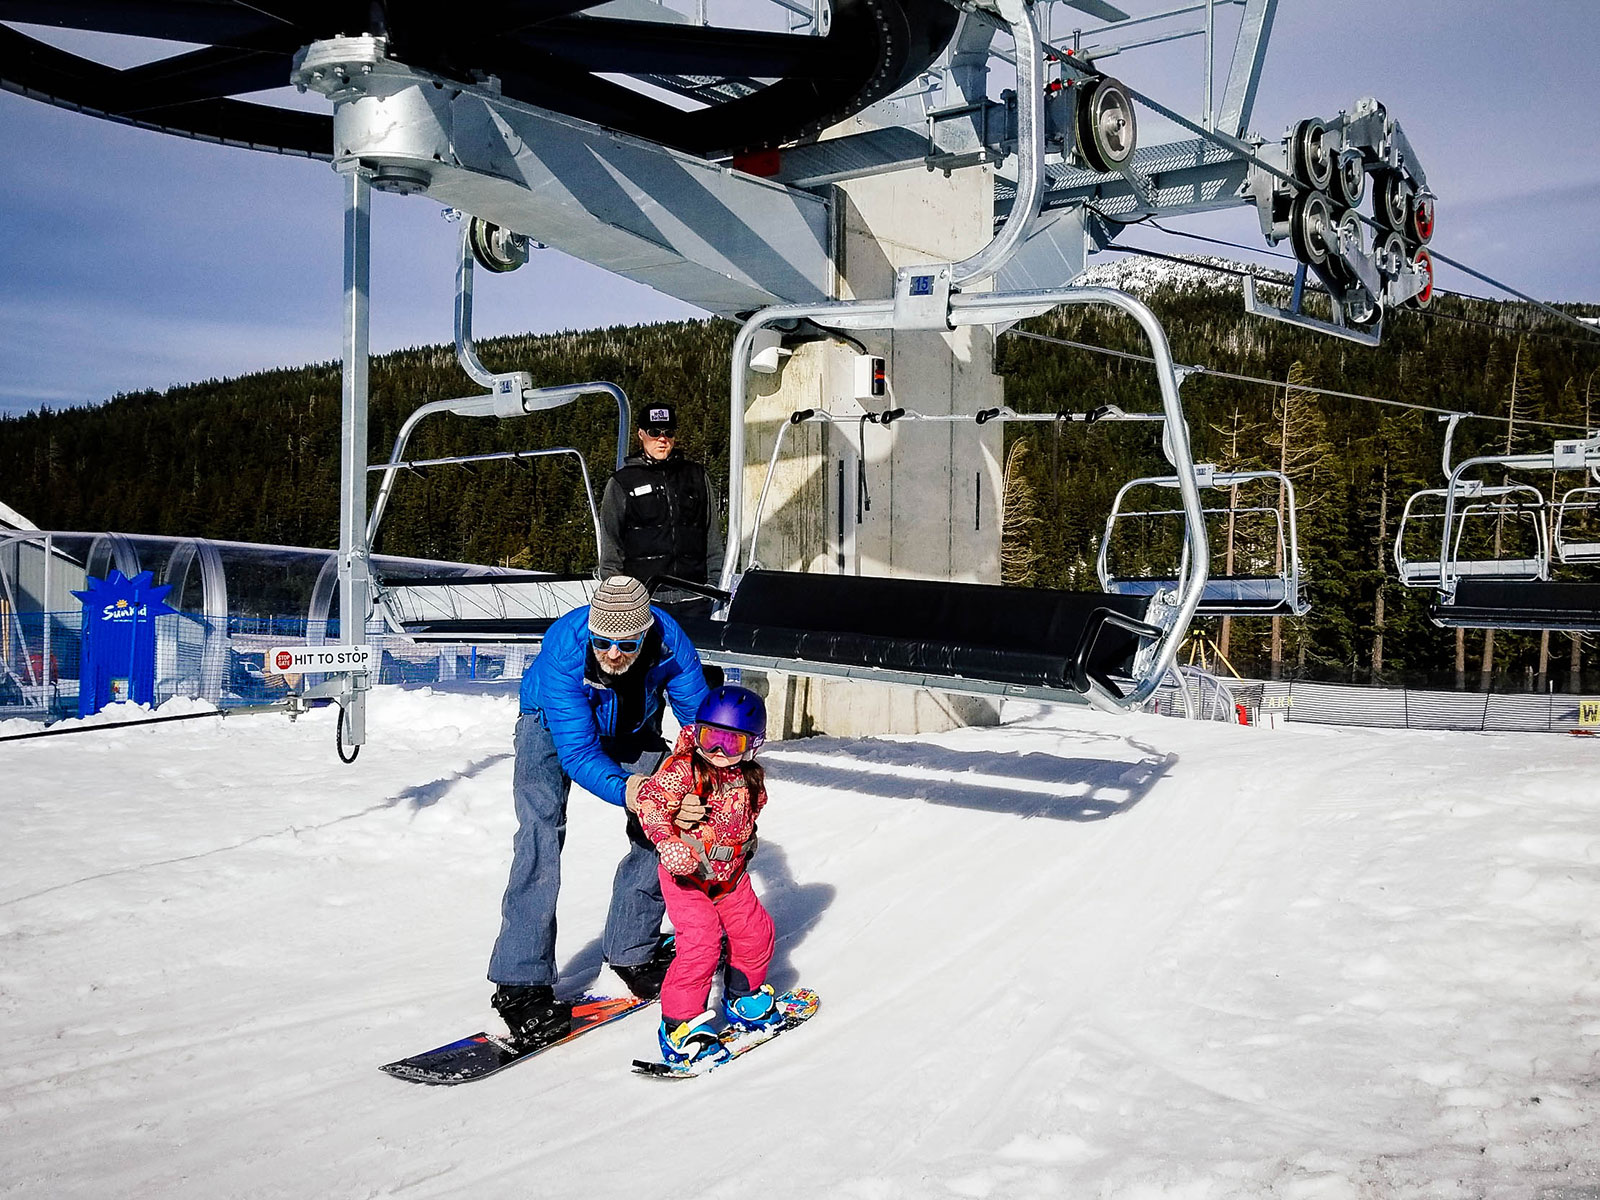 A dad helping his 3-year-old toddler get off the chairlift on snowboards